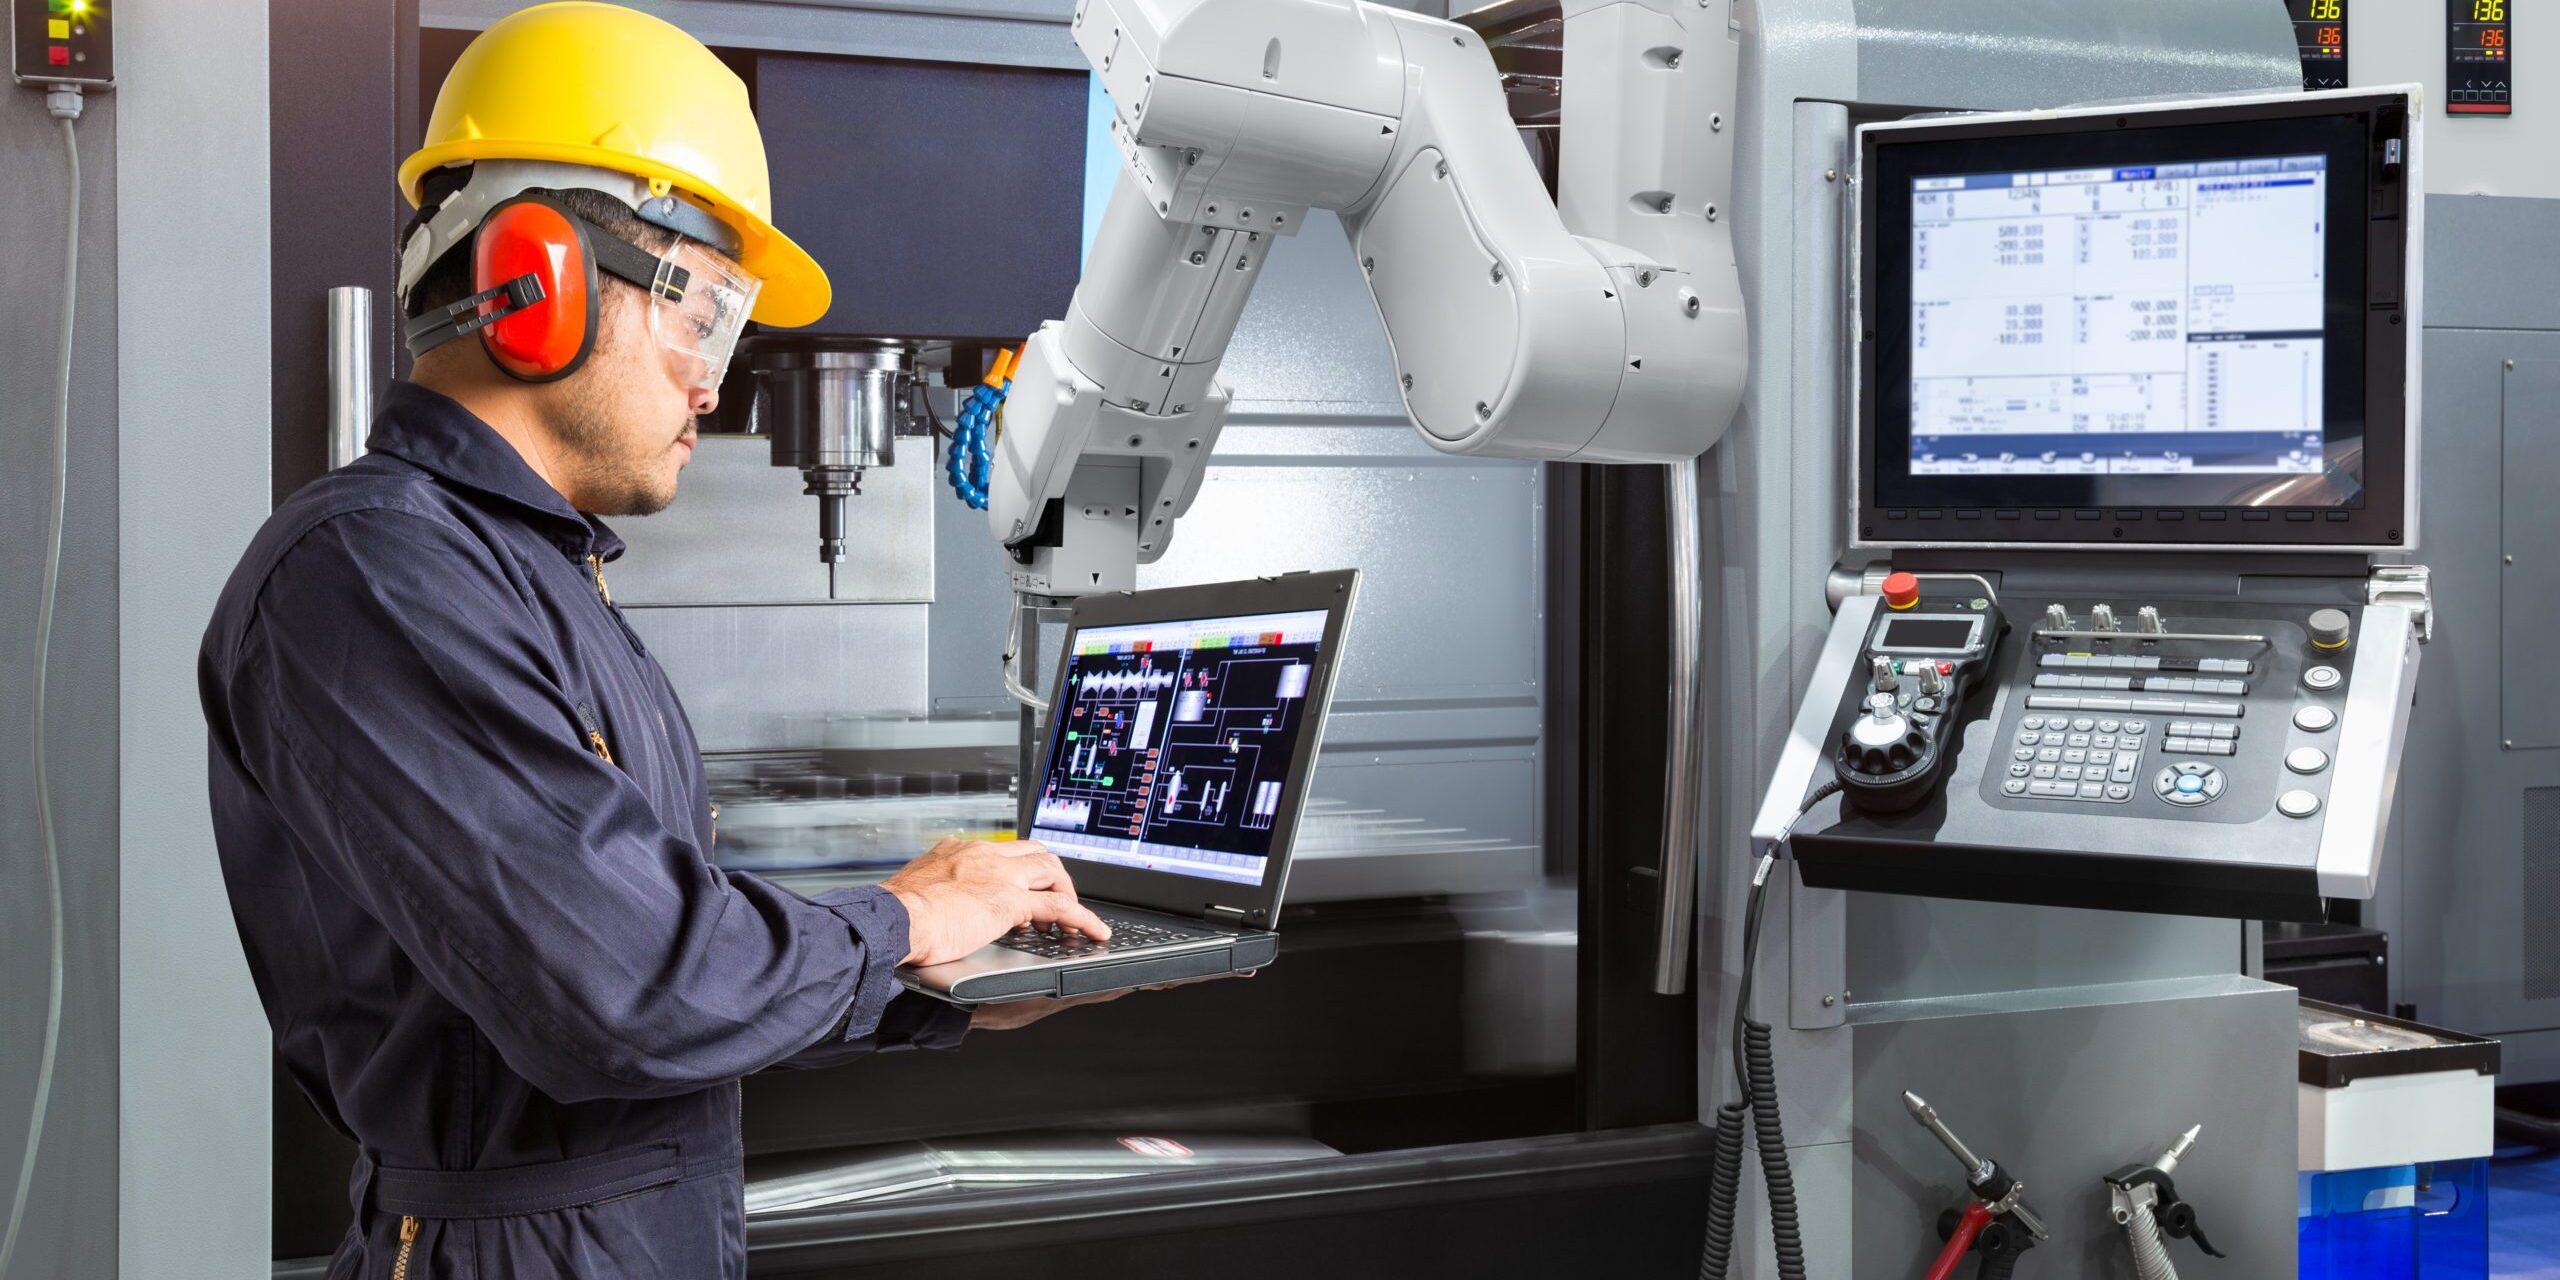 Maintenance,Engineer,Using,Laptop,Computer,Control,Automatic,Robotic,Hand,With